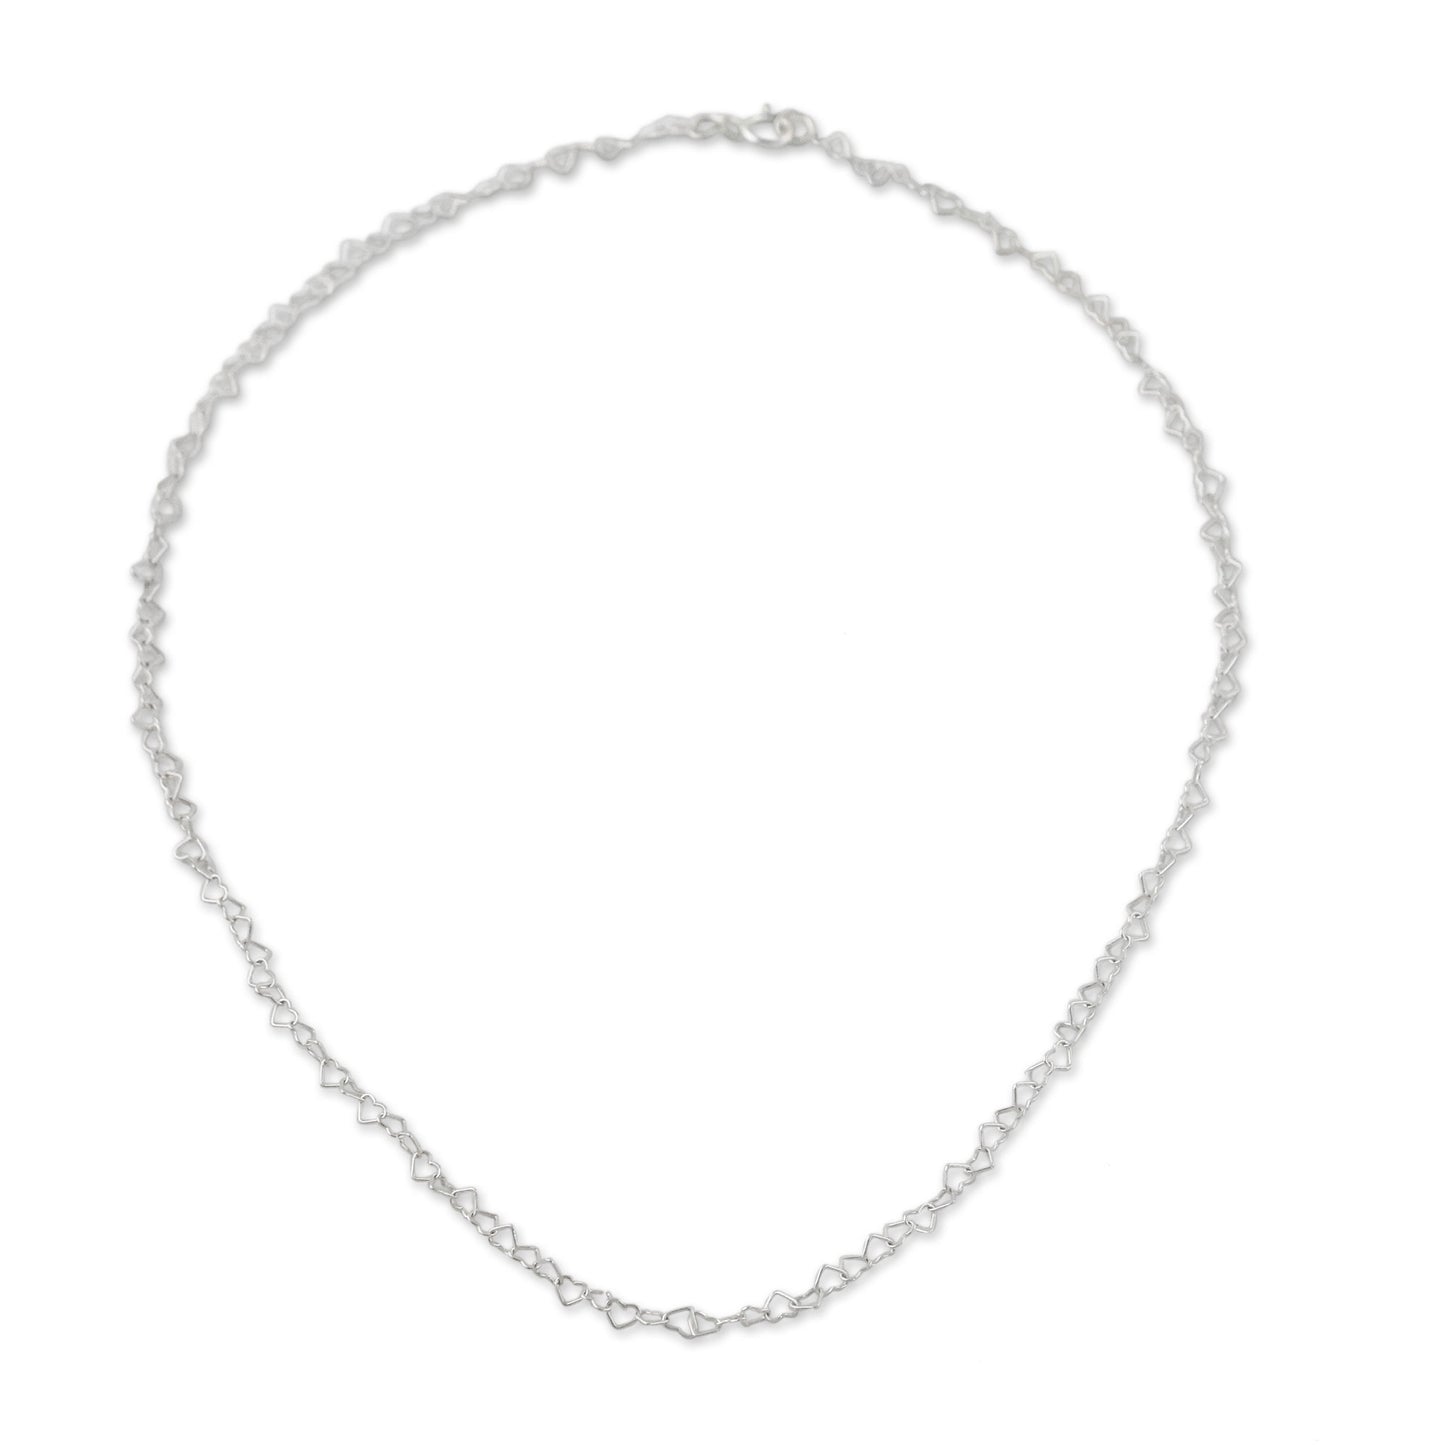 Lots of Love Sterling Silver Heart Link Necklace (3mm) from Thailand